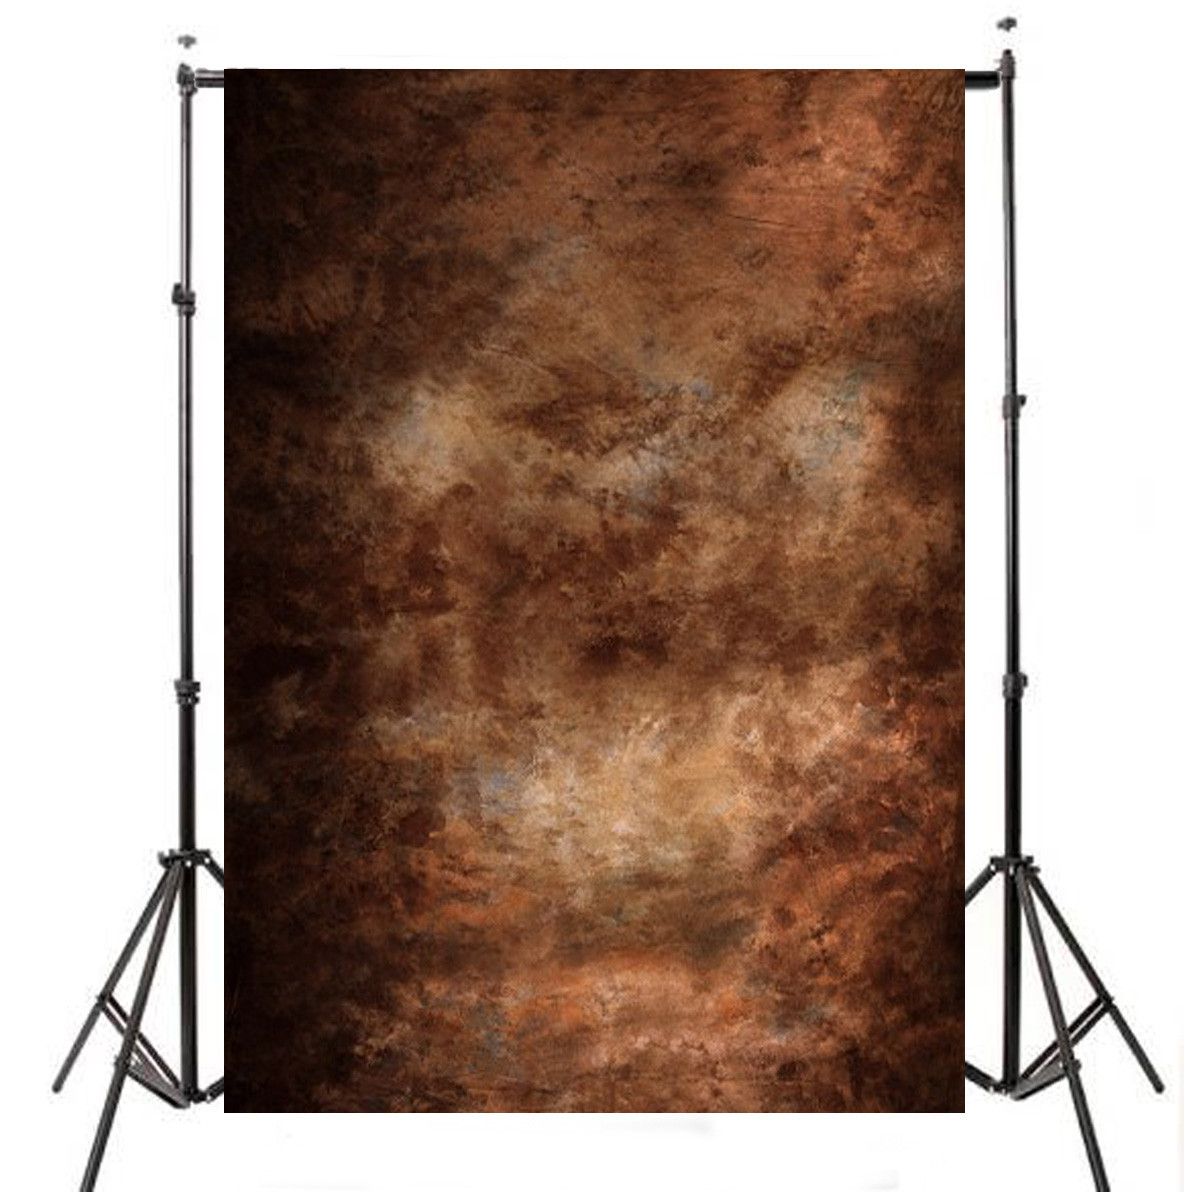 5-x-7-Inch-Abstract-Brown-Studio-Vinyl-Photography-Backdrop-Prop-Photo-Backdrops-Background-1412990